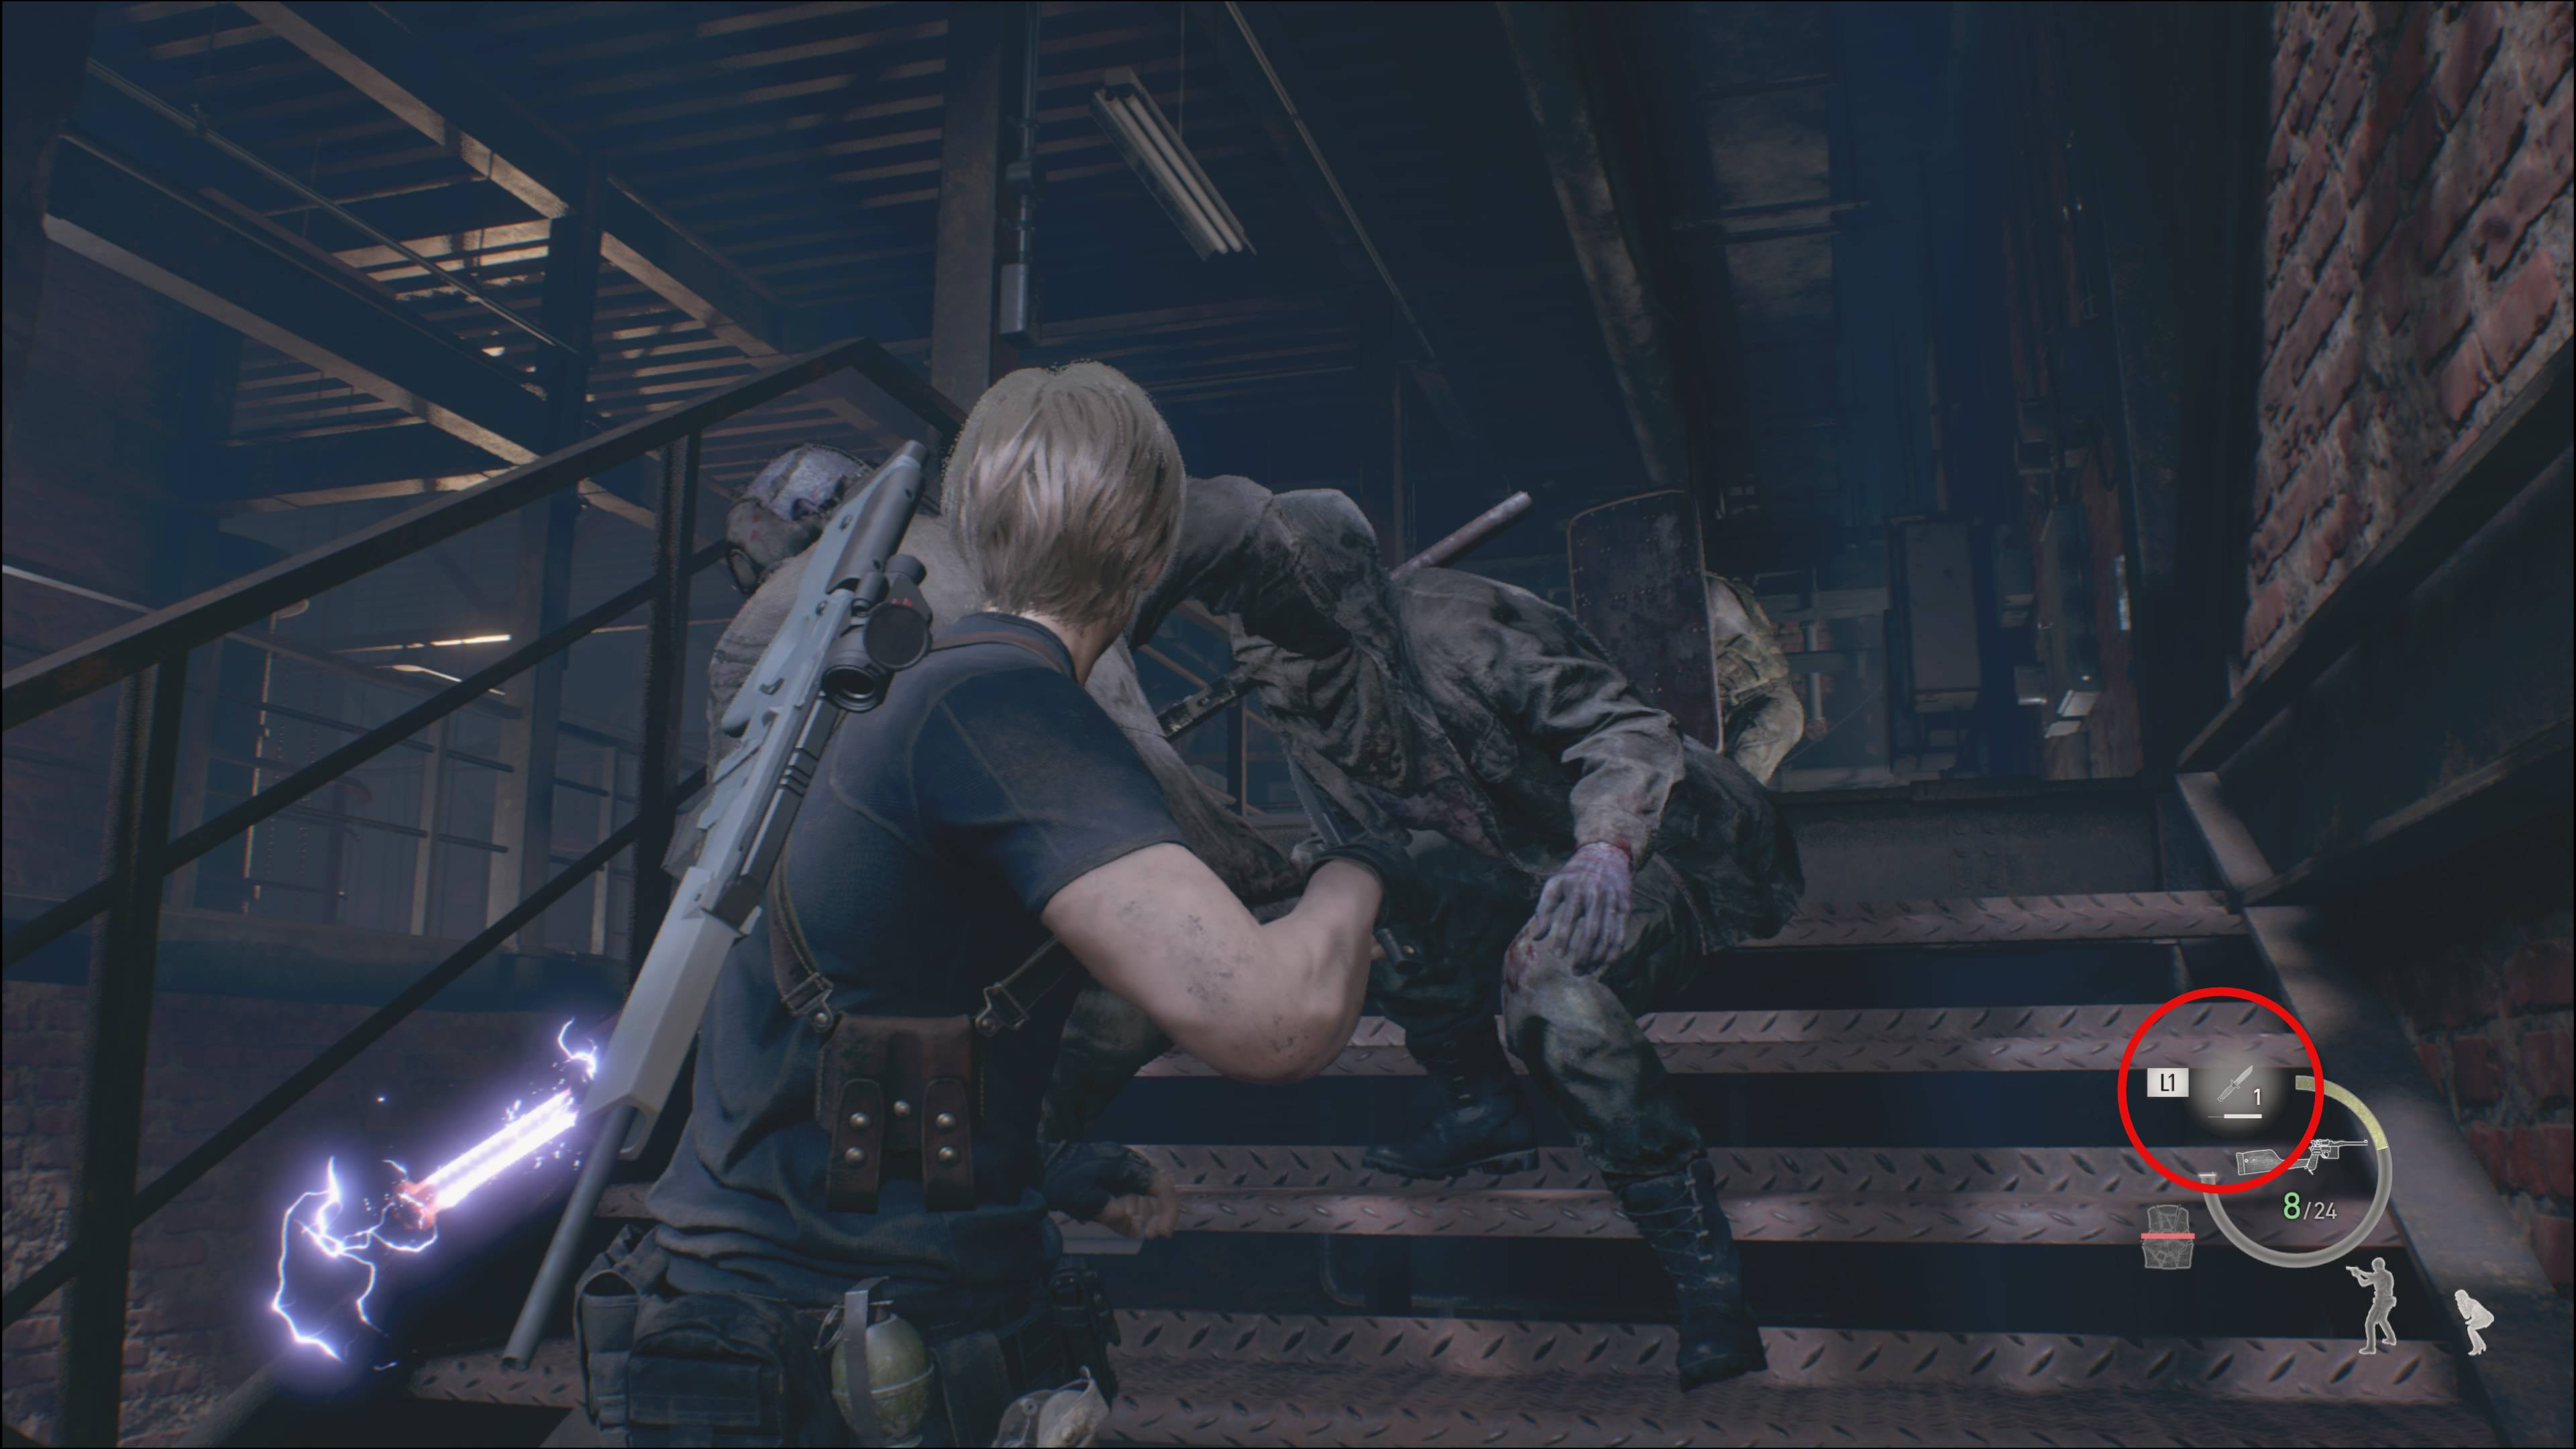 Does the Resident Evil 4 remake have PlayStation button prompts on PC?